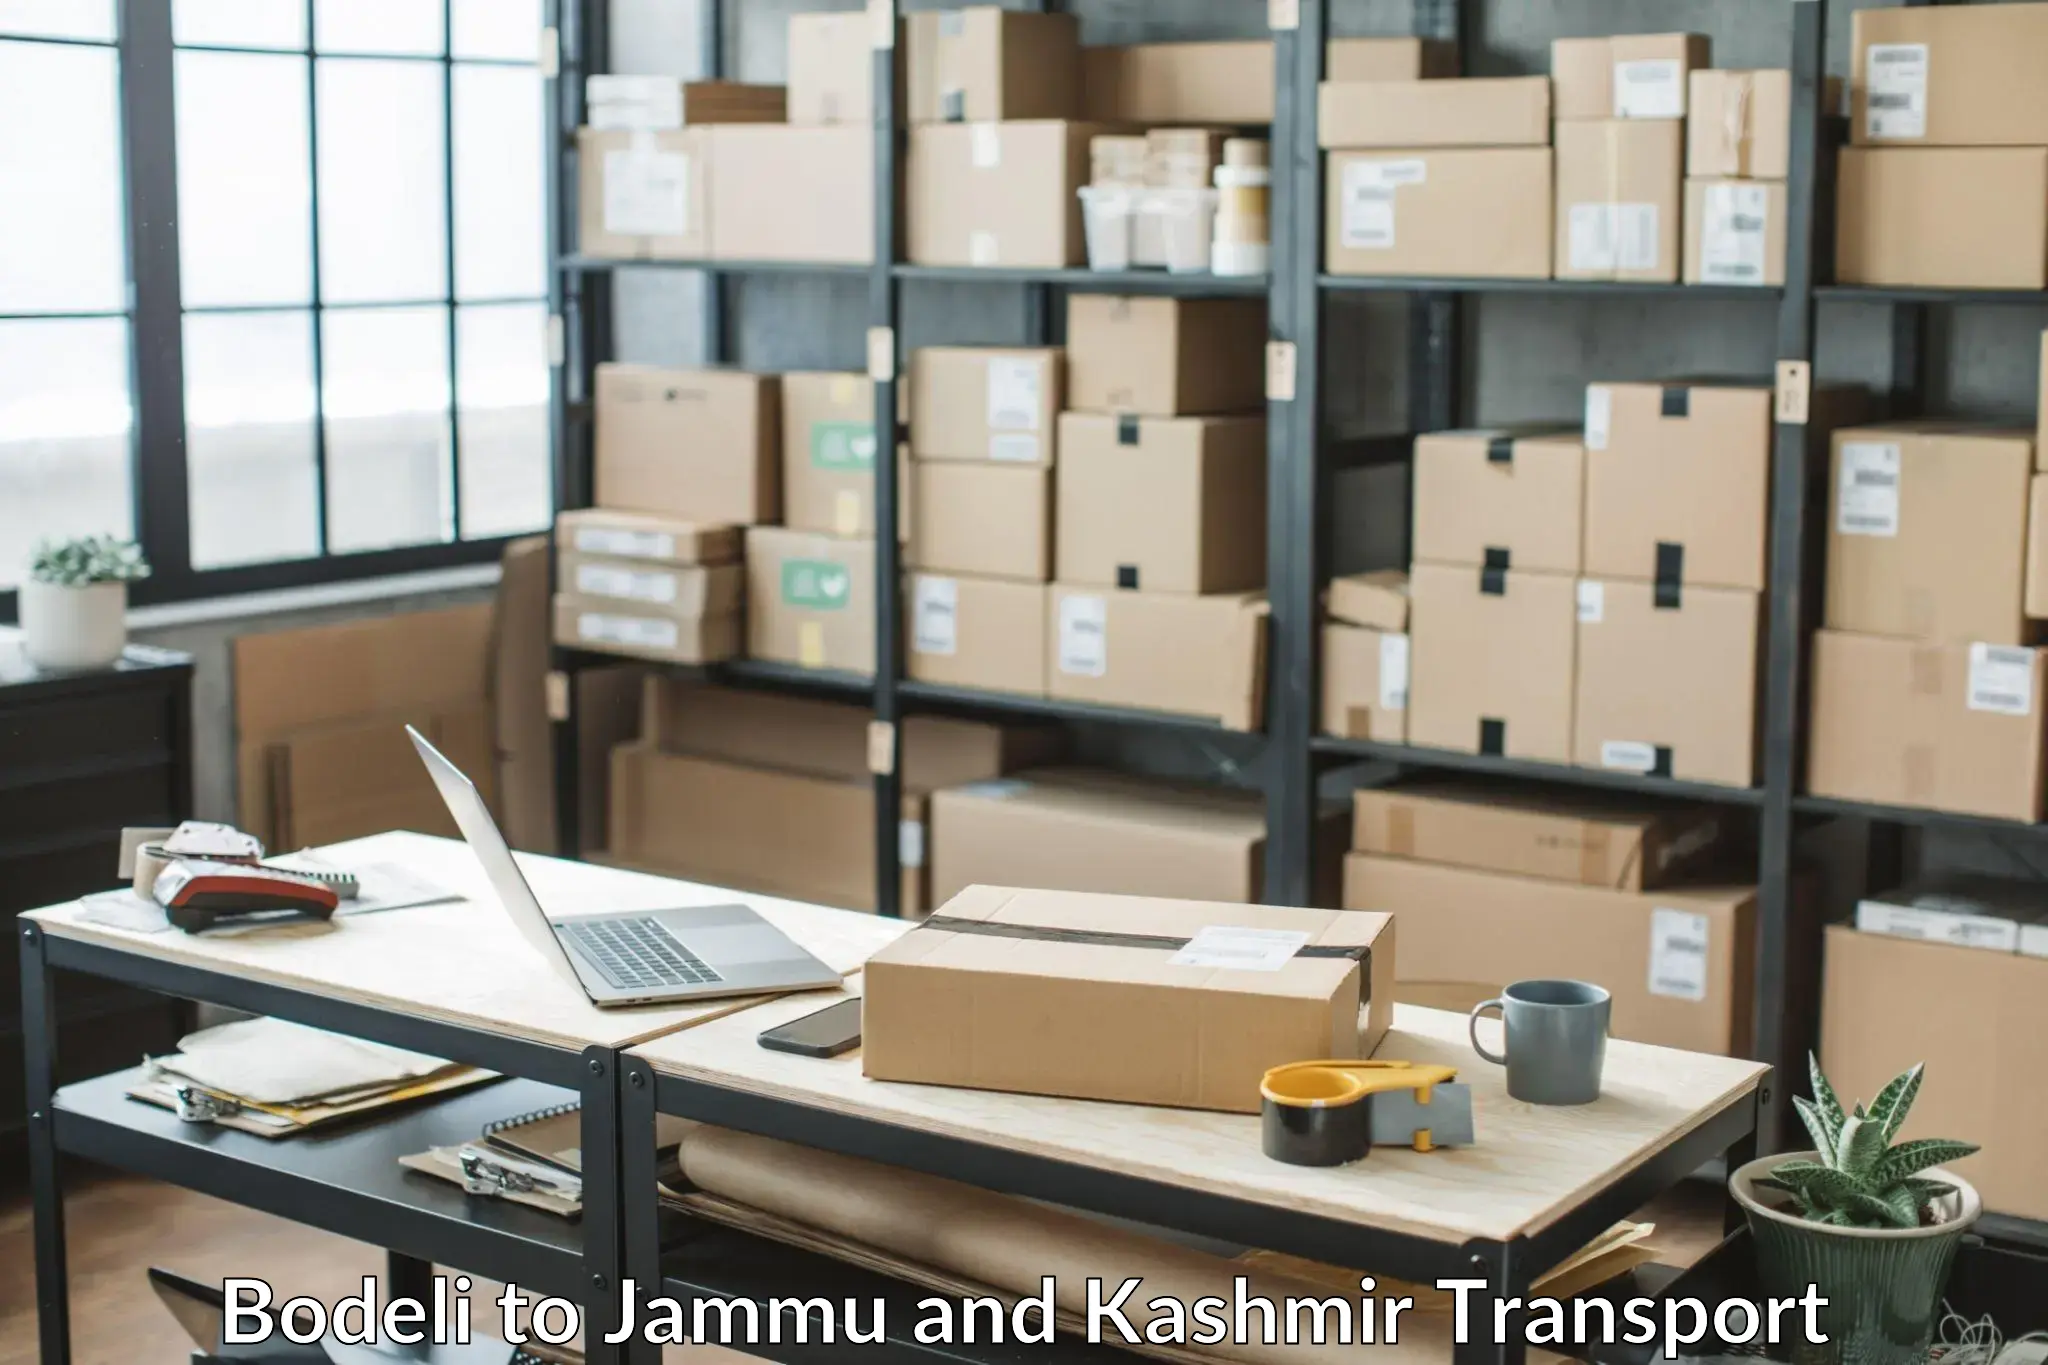 Air freight transport services in Bodeli to Baramulla